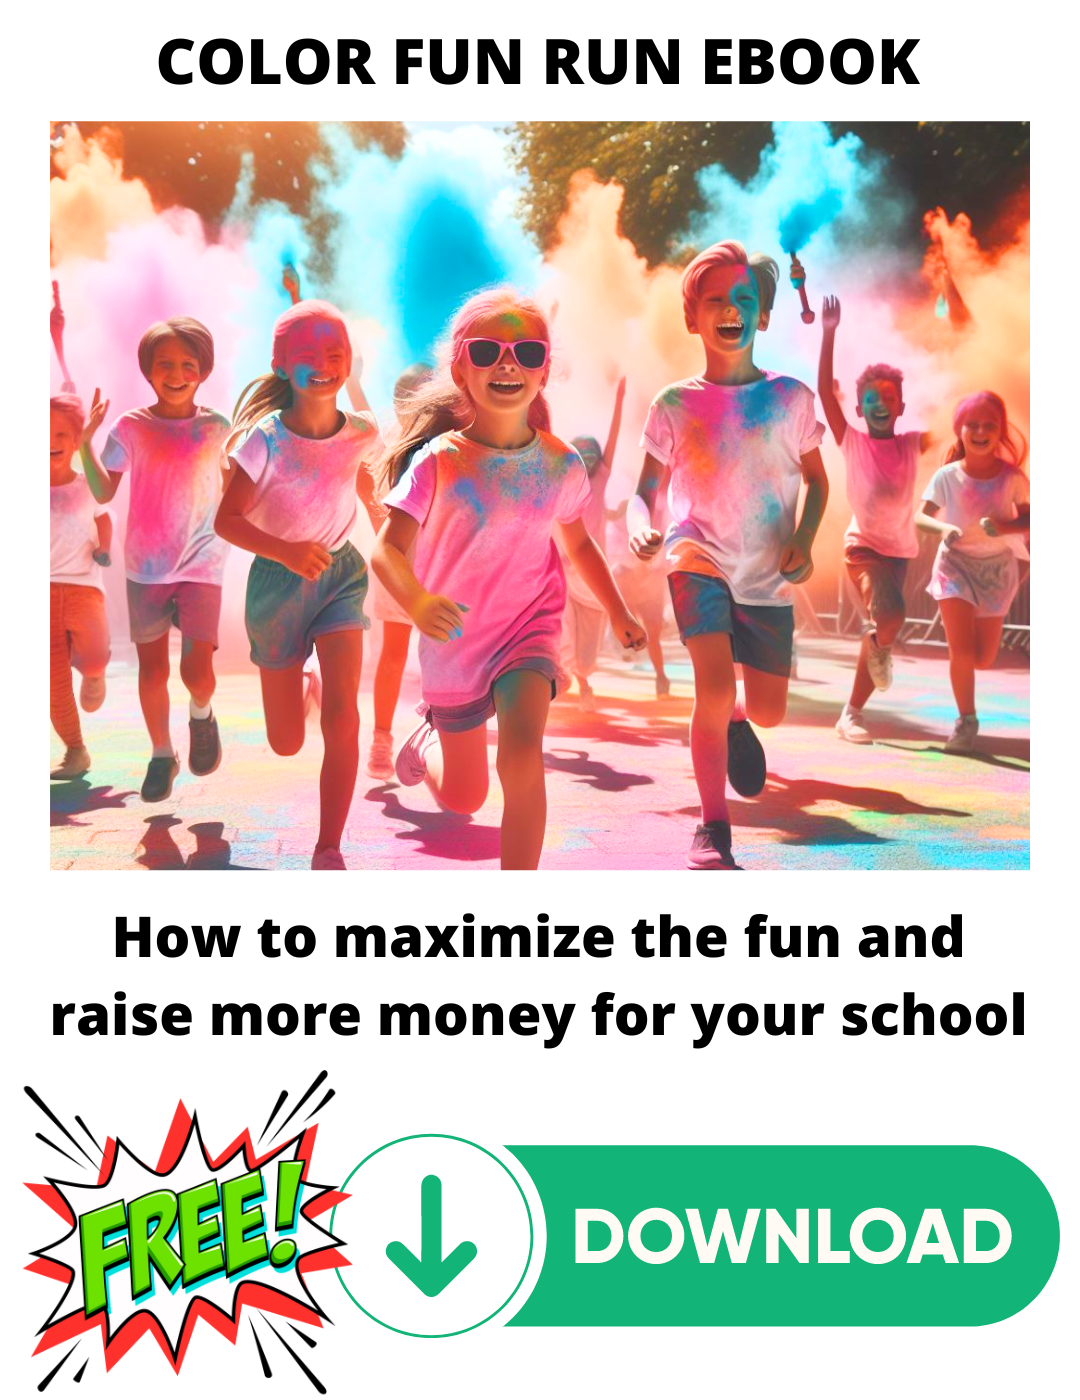 how to organize a fun and profitable color run for your school free ebook